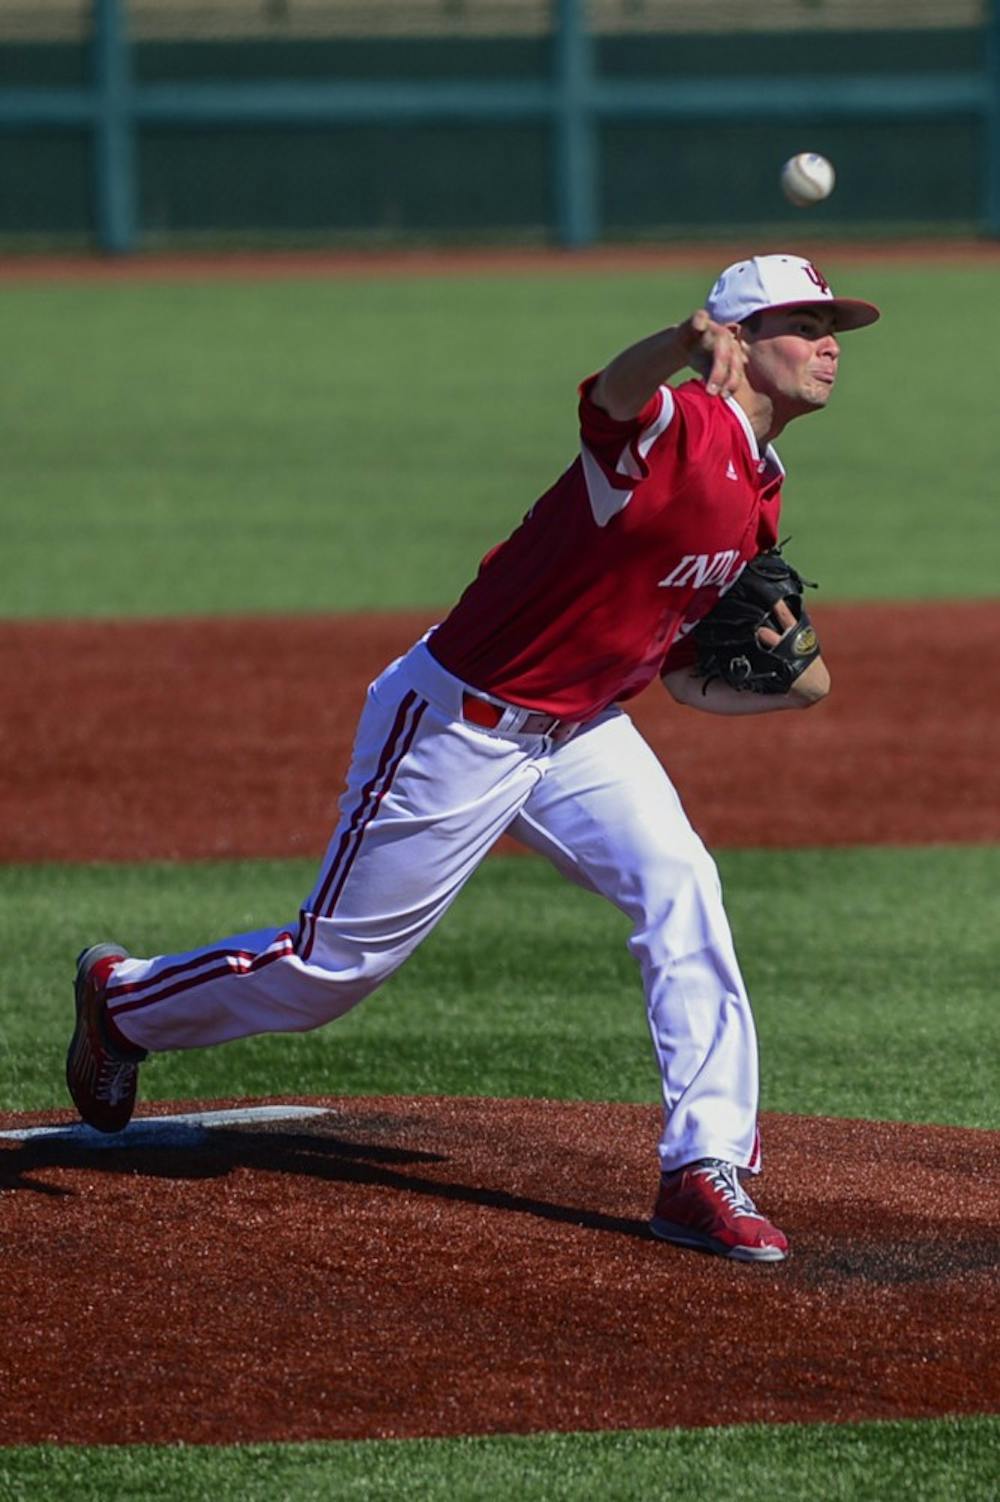 Junior Scott Effross pitches during IU's game against Valparaiso on Tuesday at Bart Kaufman Field. Effross only pitched the first inning of Tuesday's game.